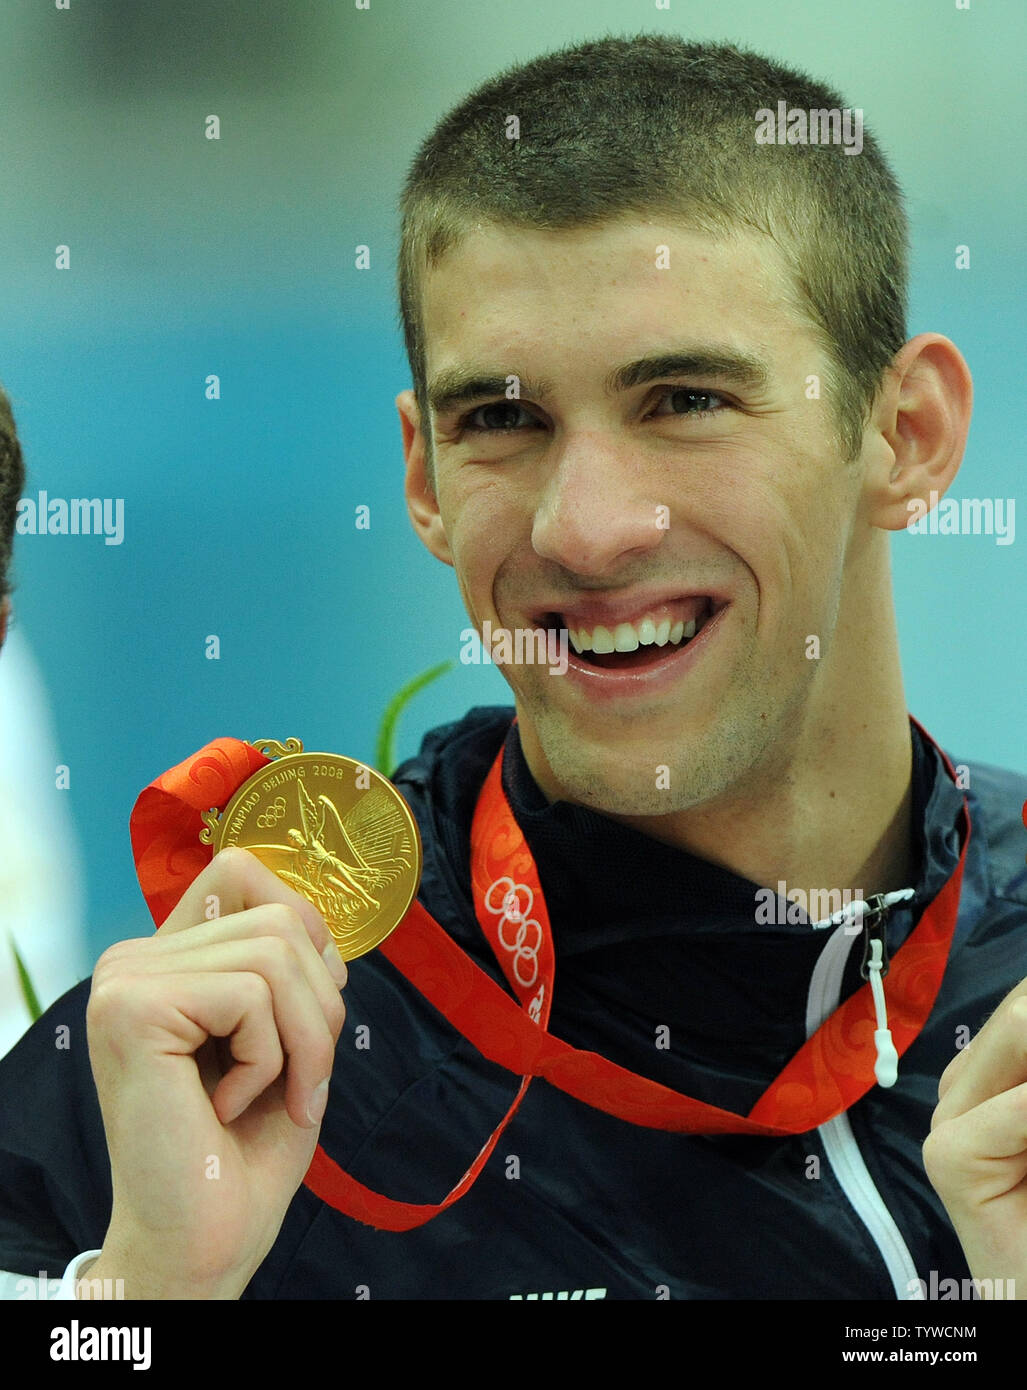 USA's Michael Phelps shows his medal for his part in the Men's 4x100M Medley, where the US team set a world record and won gold, at the National Aquatic Center (Water Cube) during the 2008 Summer Olympics in Beijing, China, on August 17, 2008.  Phelps set the world record for medals in a single Olympics with 8, passing Mark Spitz.    (UPI Photo/Roger L. Wollenberg) Stock Photo